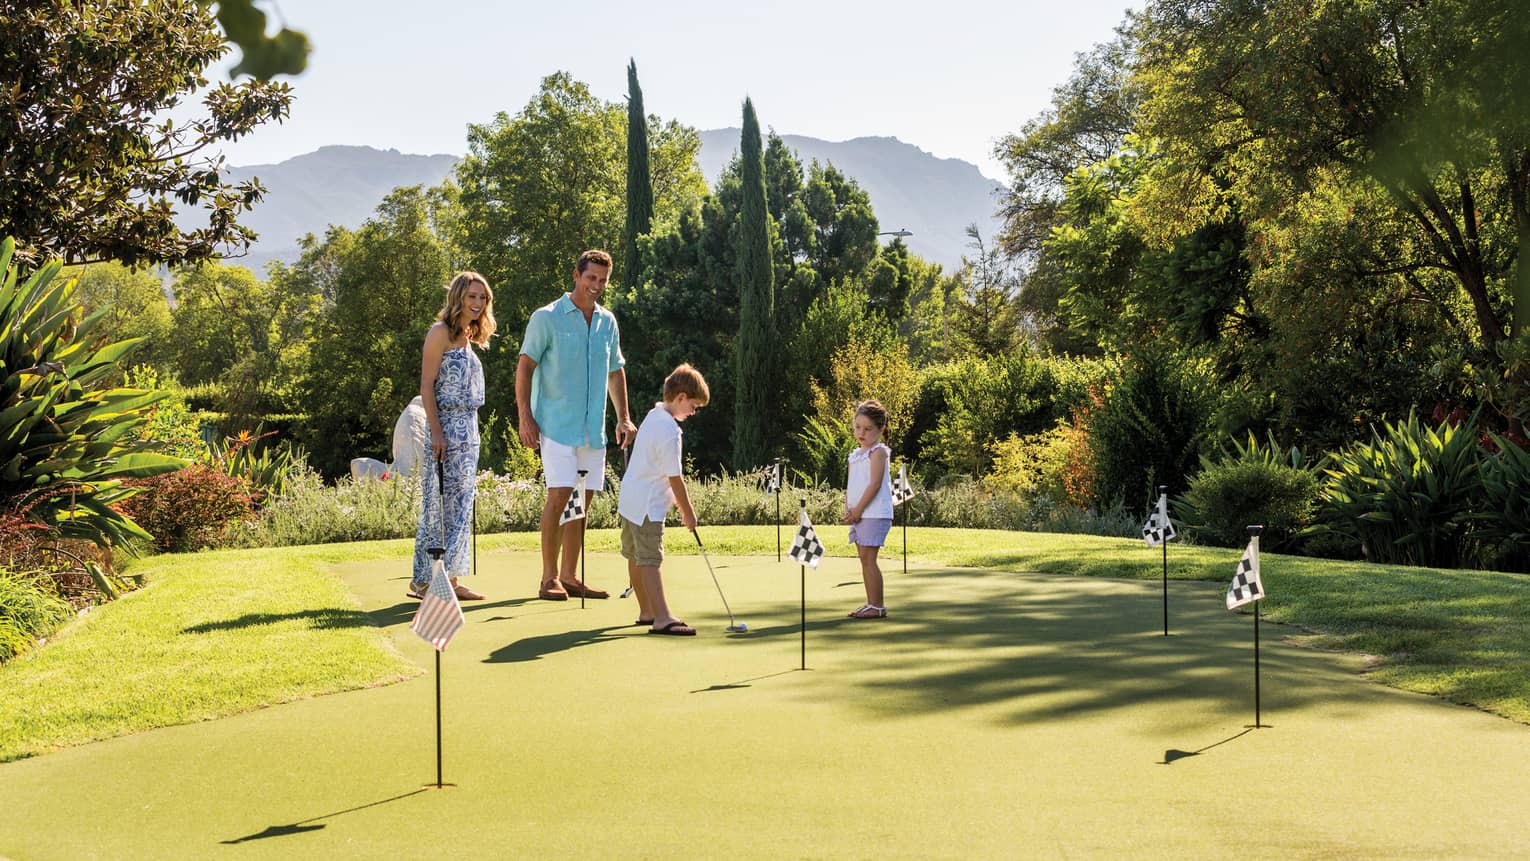 Young boy prepares to putt on mini putting green with flags as sister, parents watch